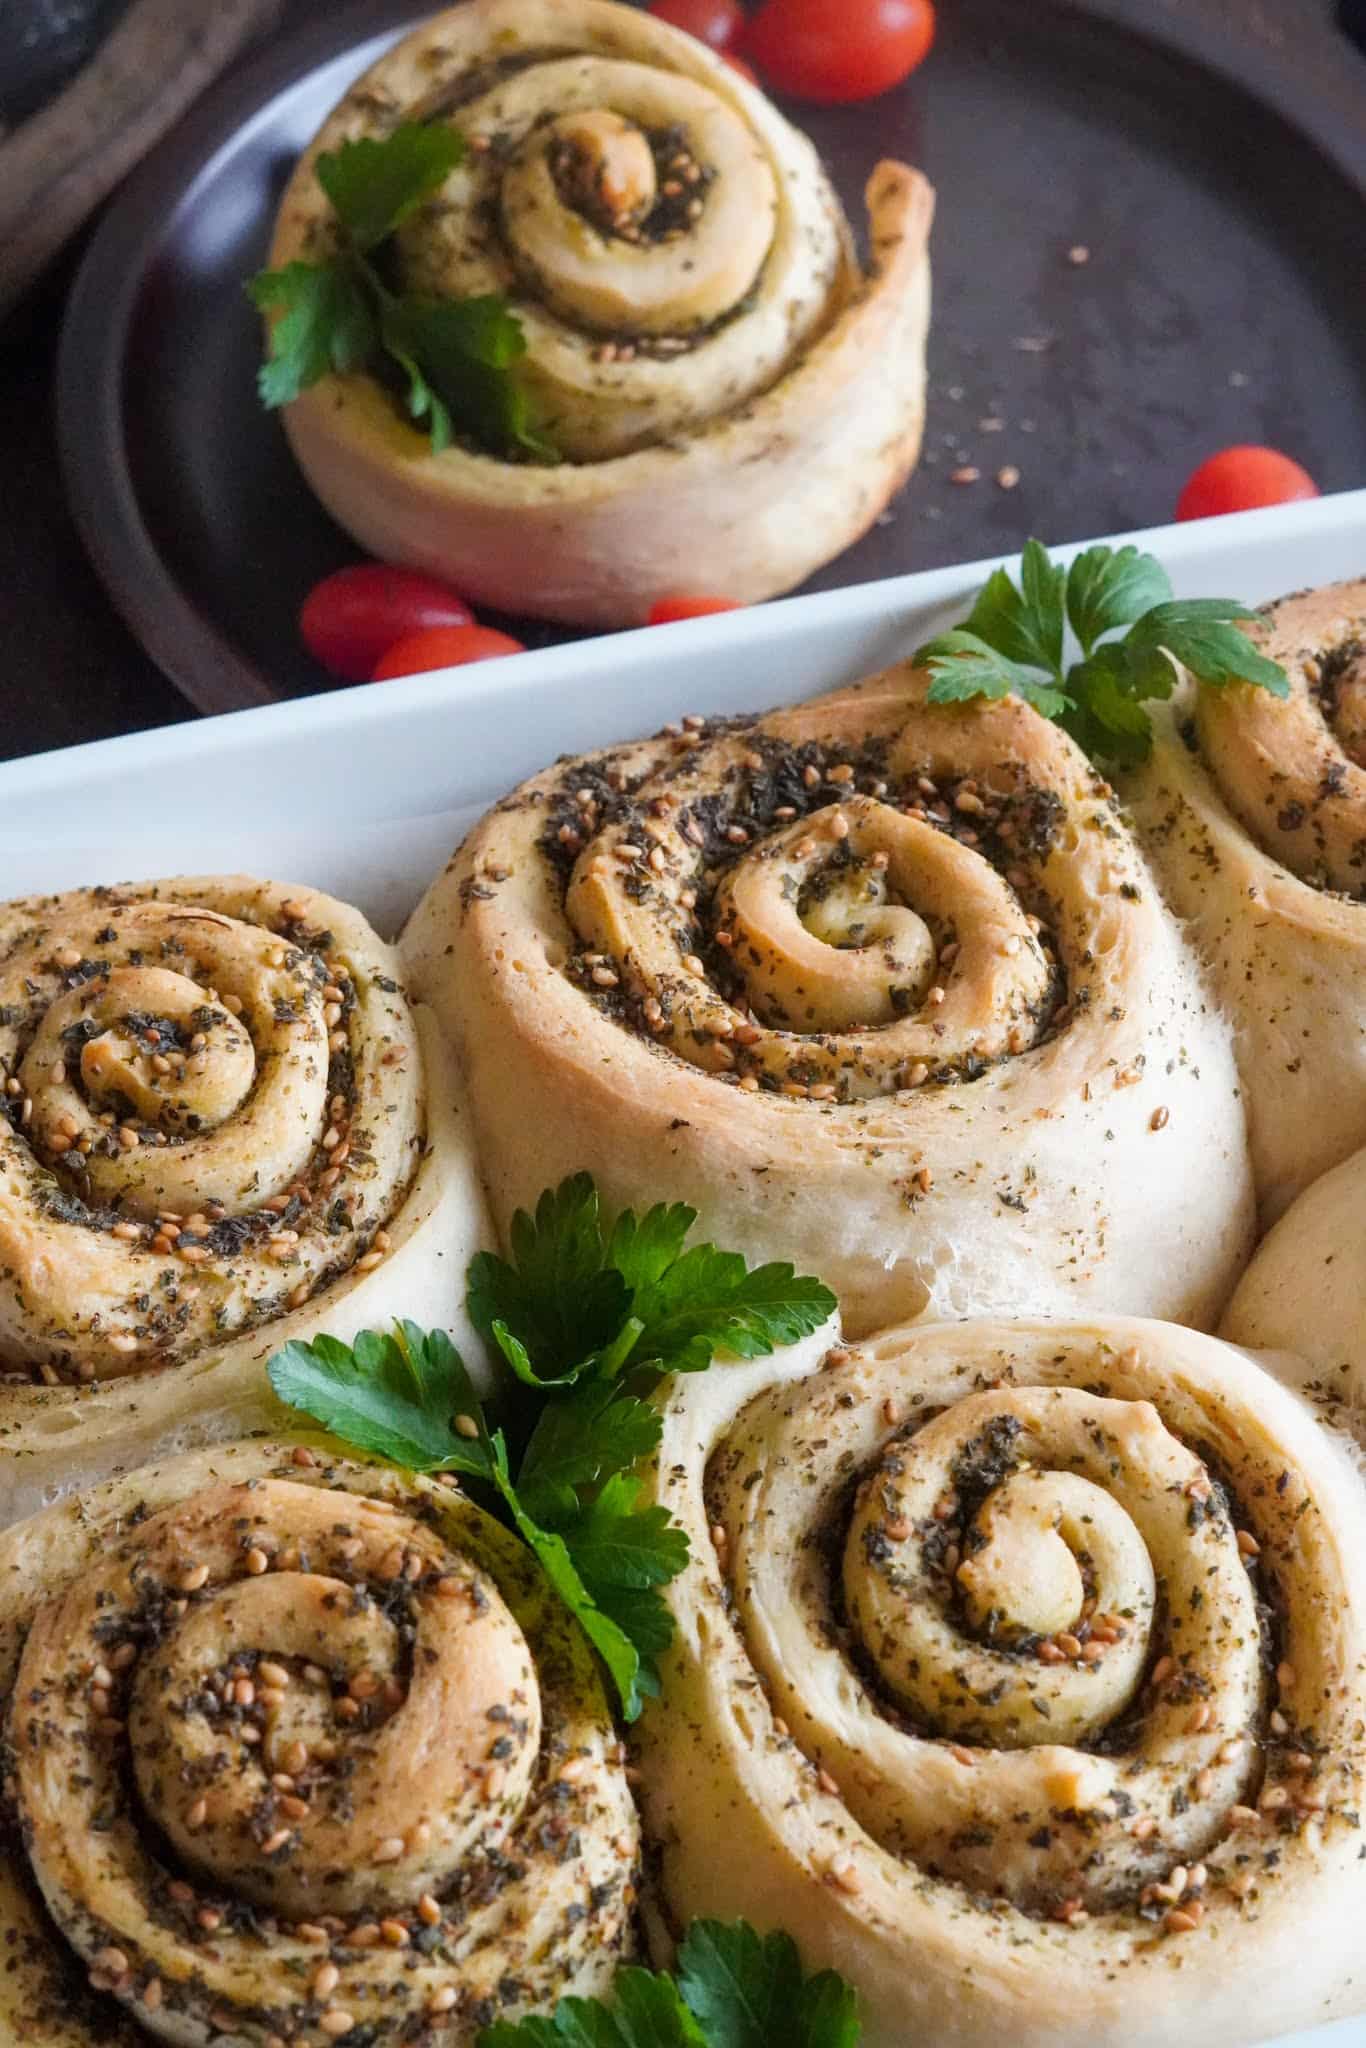 Bread rolls stuffed with za'atar decorated with parsley leaves.